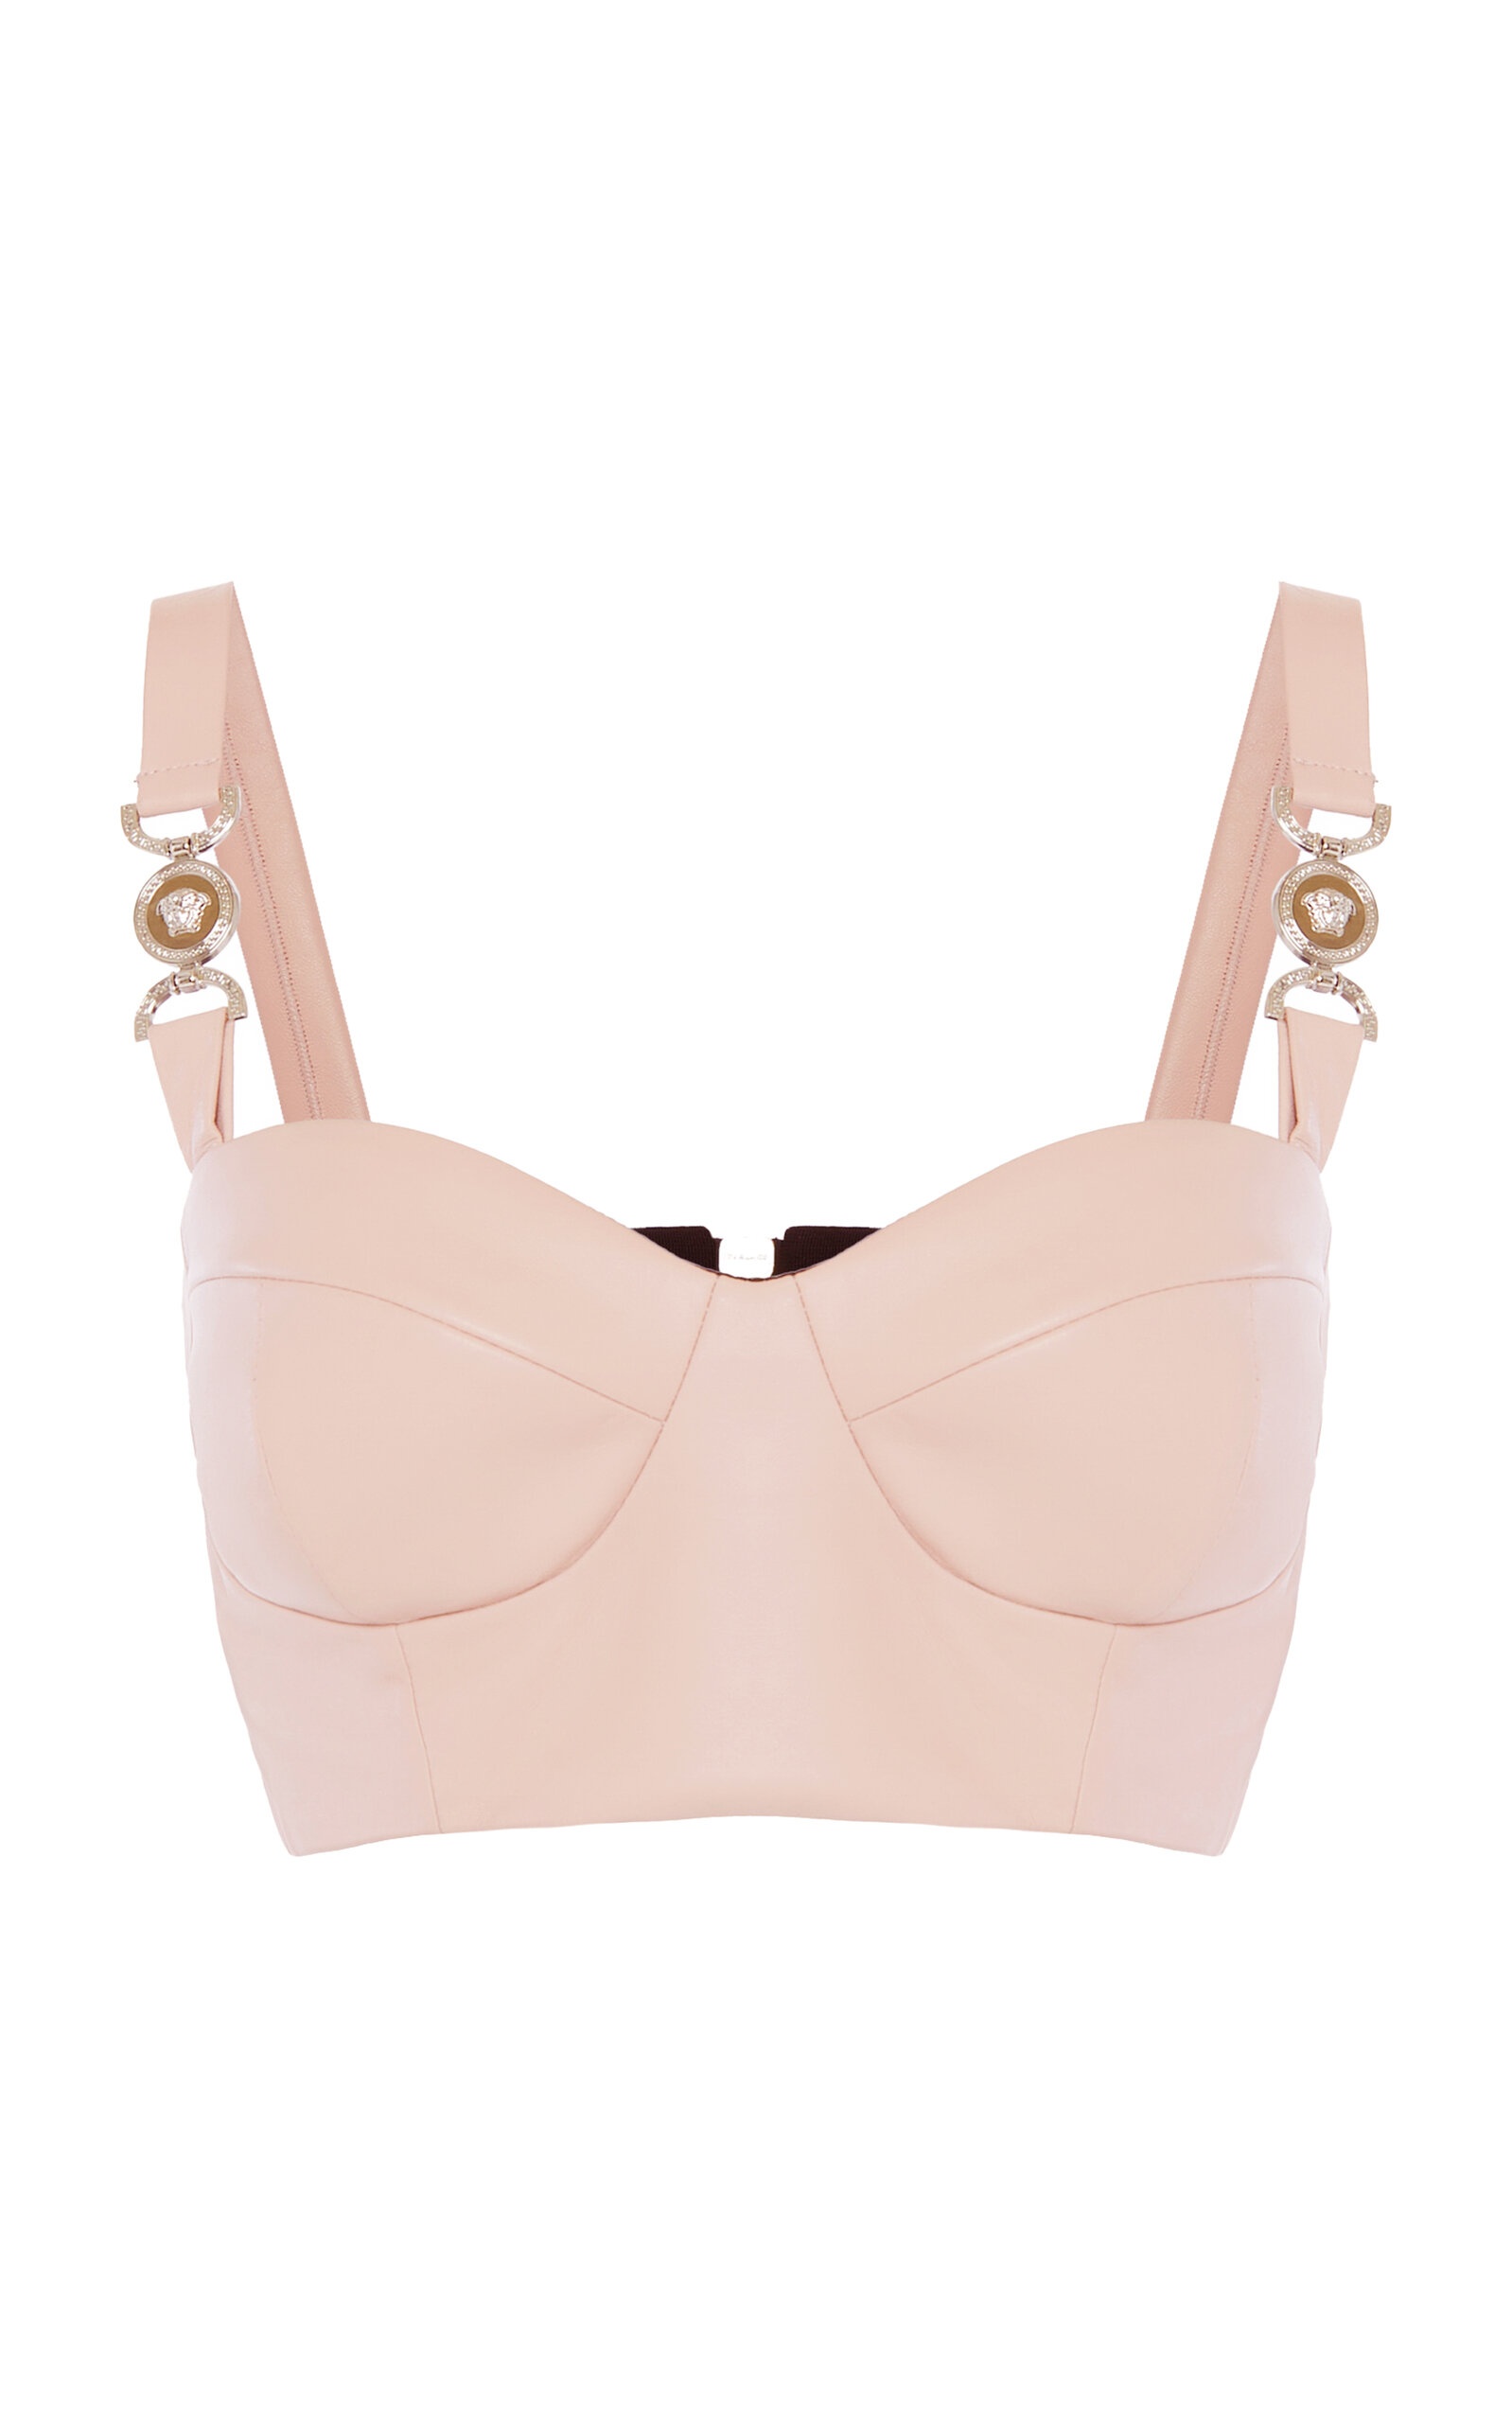 Cropped Leather Bustier Top pink - 1